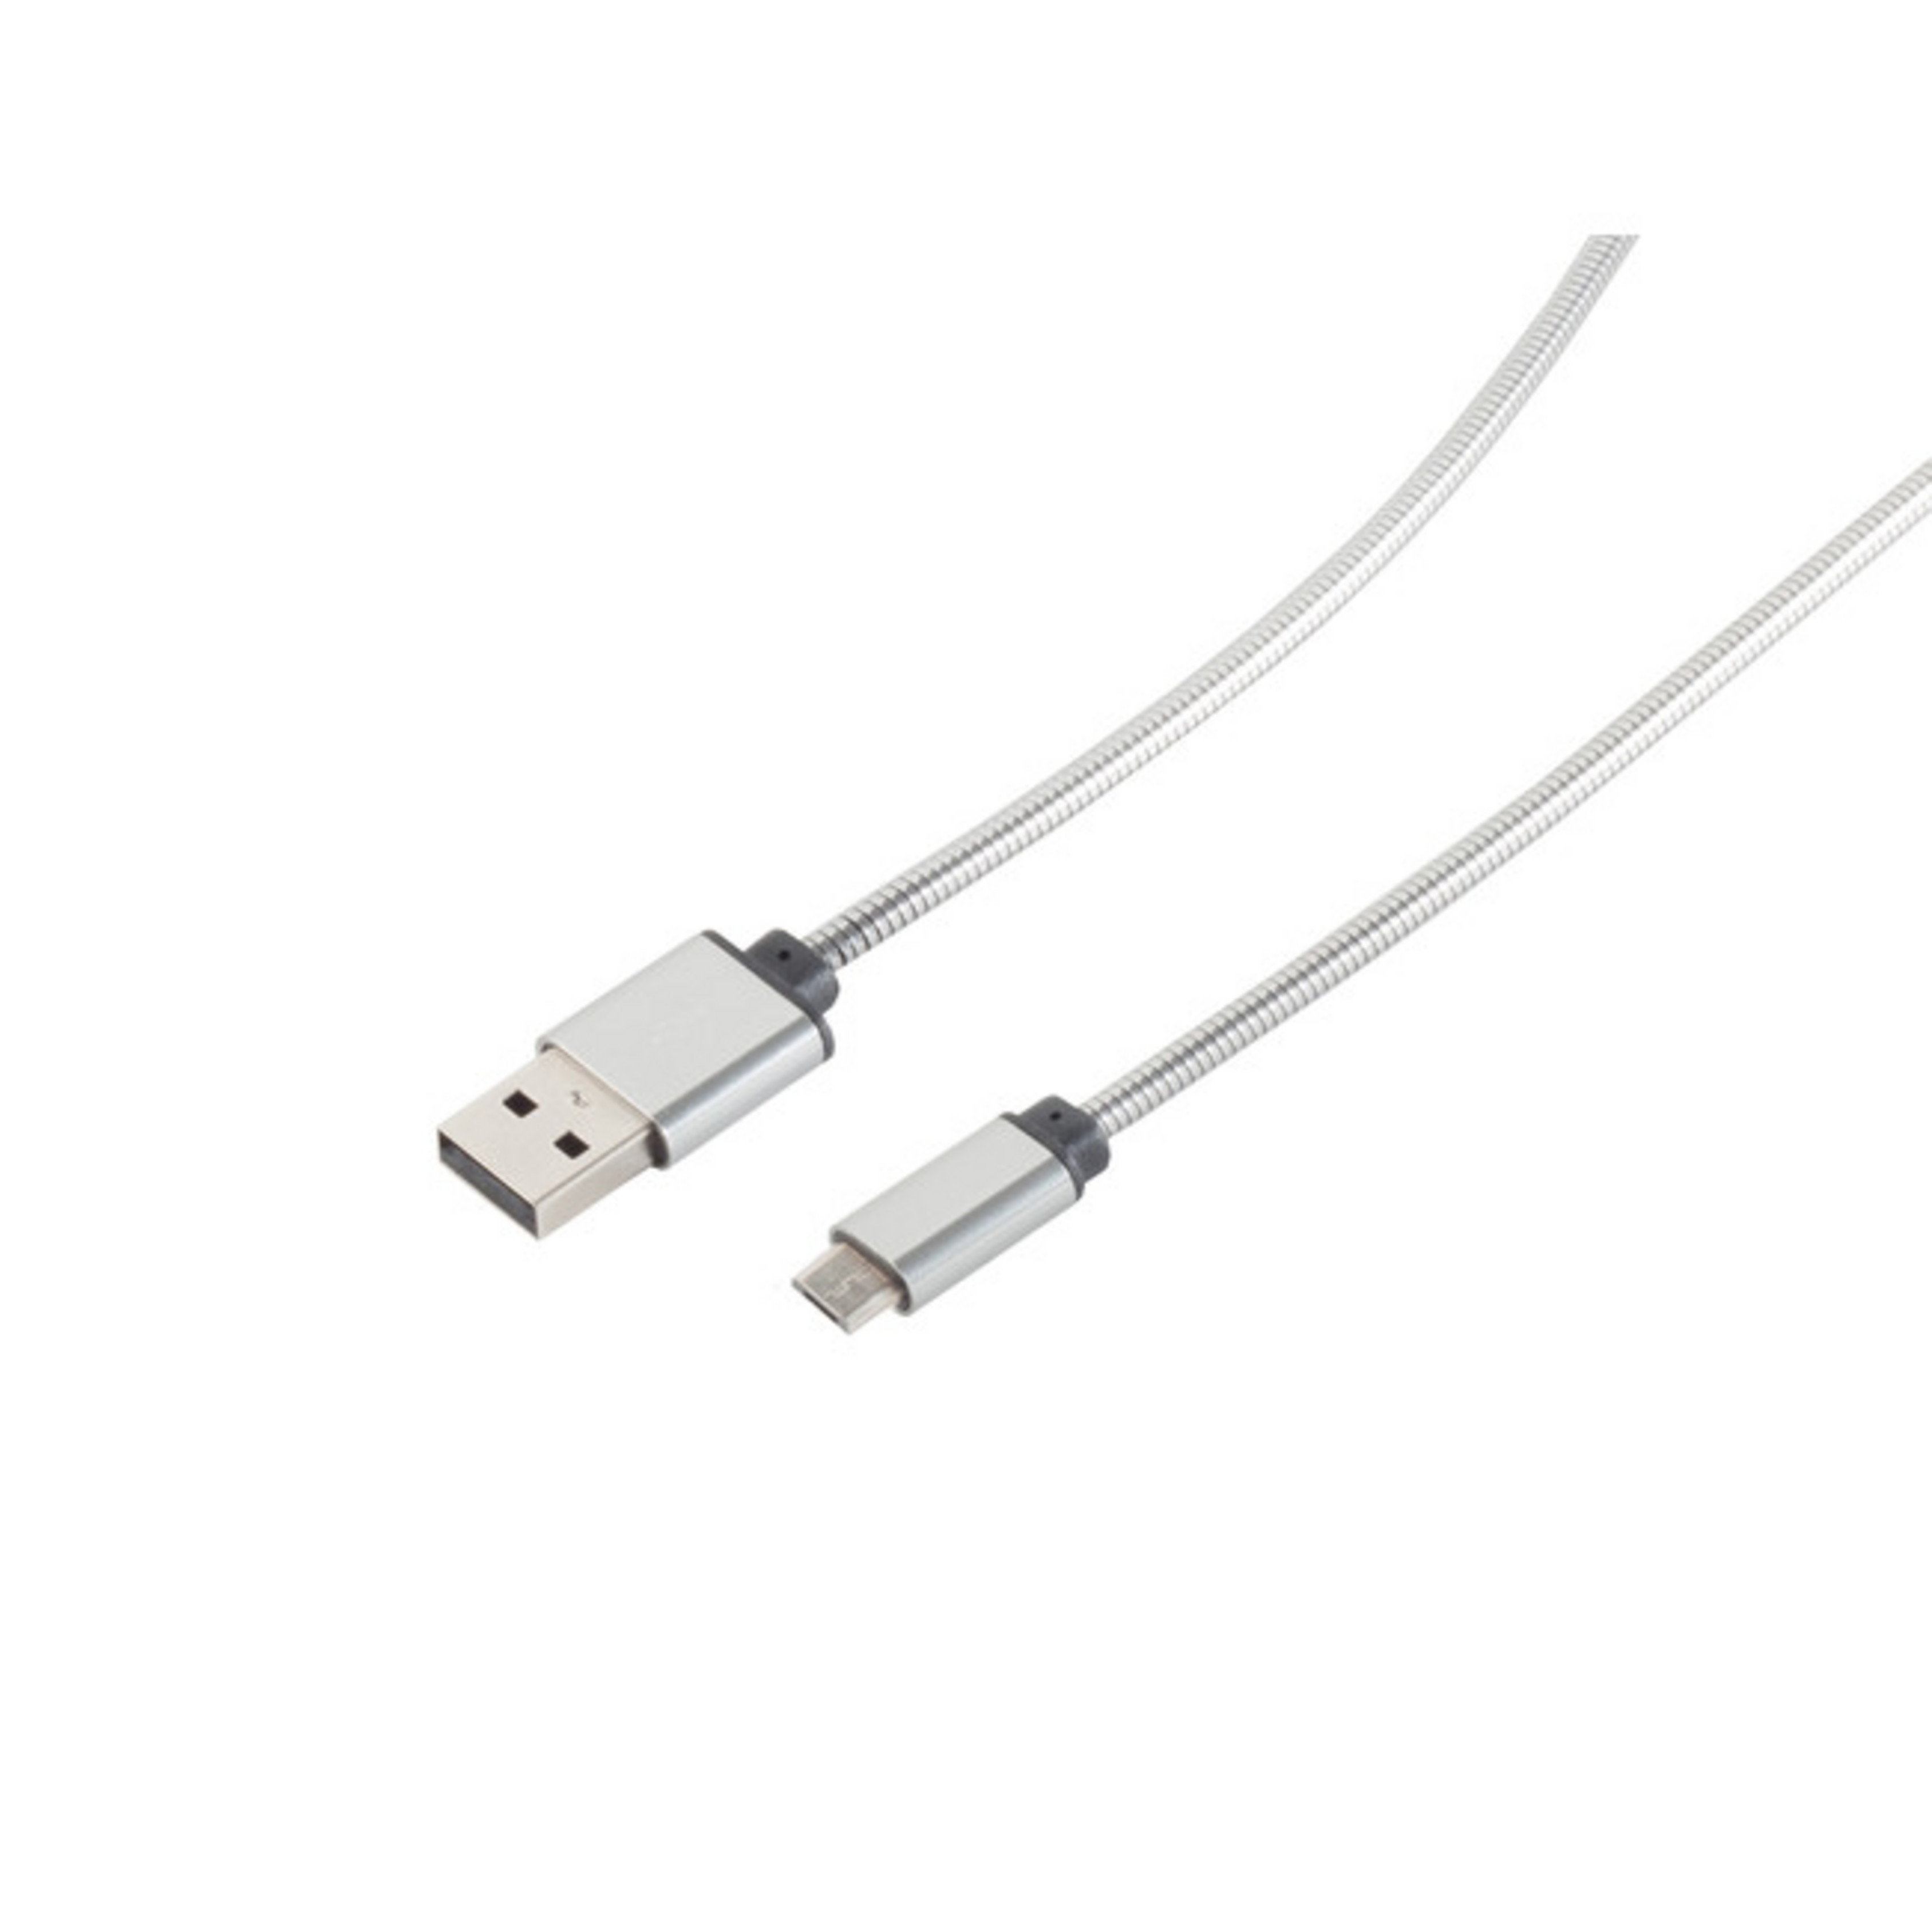 Kabel Steel Lade-Sync CONNECTIVITY A/ S/CONN 1m USB MAXIMUM USB USB Silber Kabel micro,